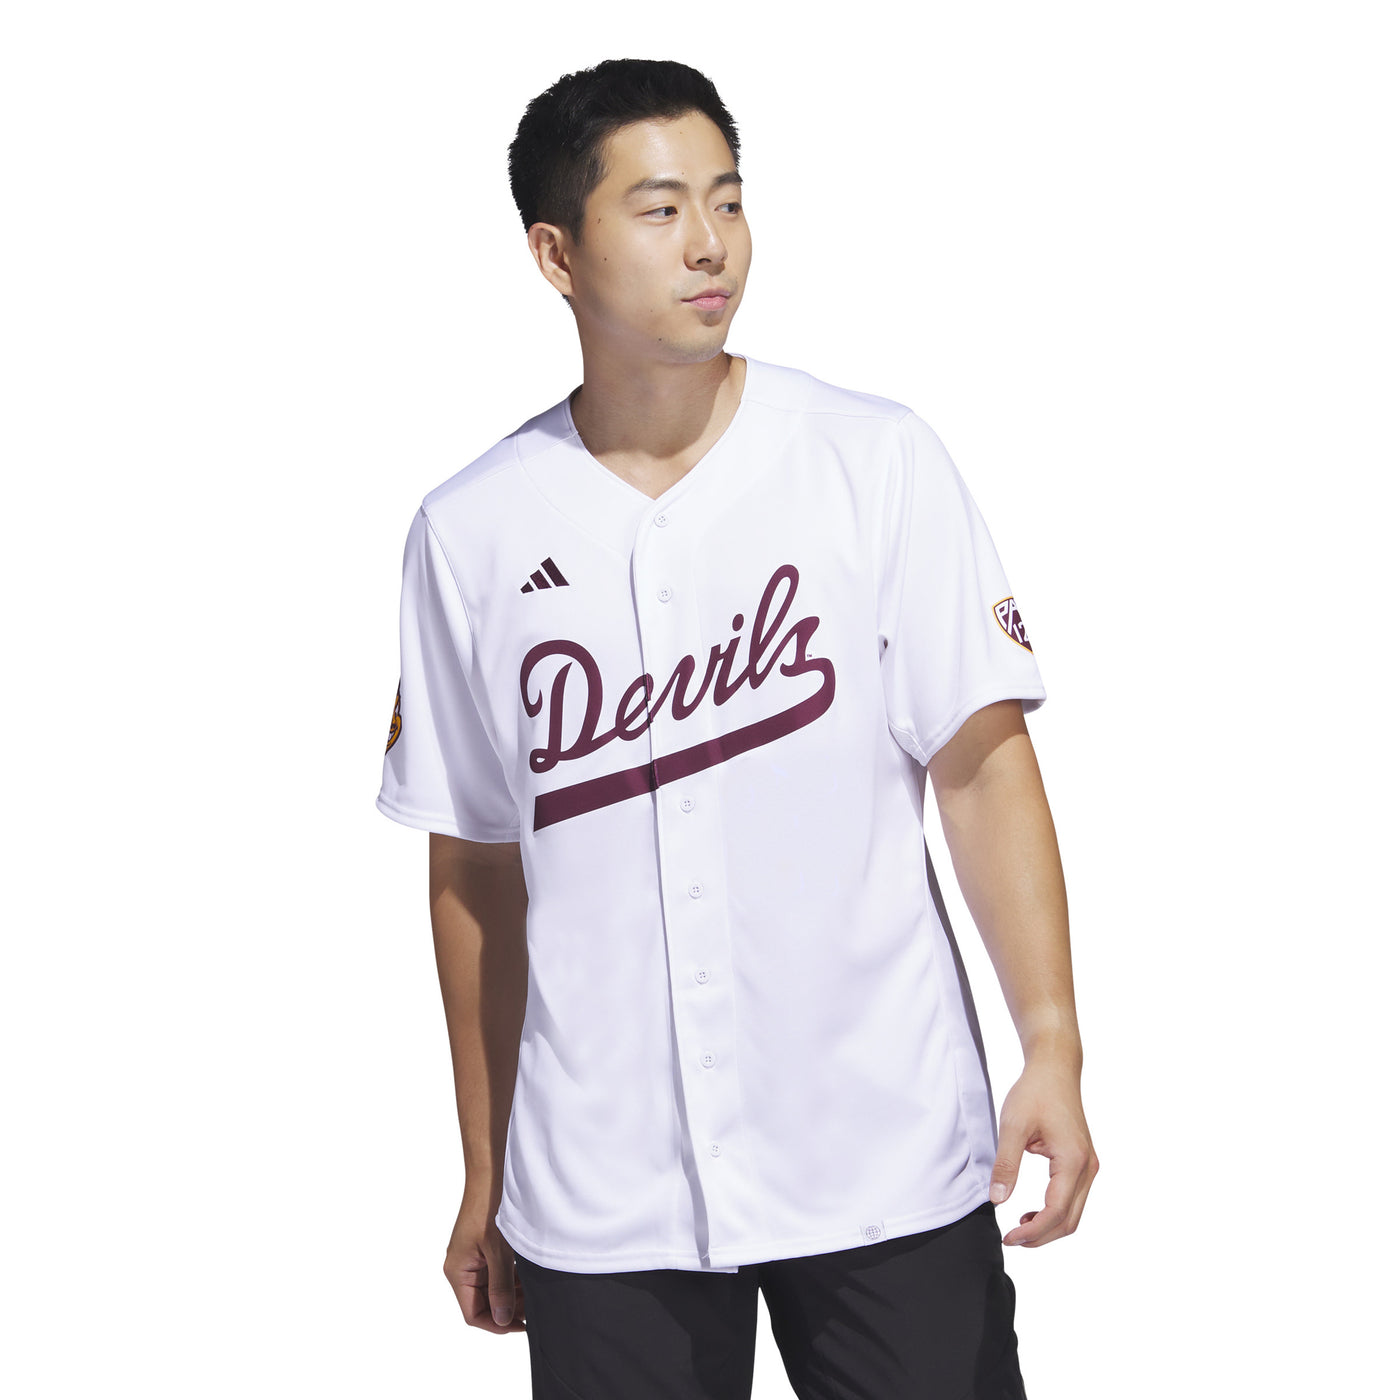 Photo of man wearing an ASU white baseball jersey with 'Devils' lettering across the chest